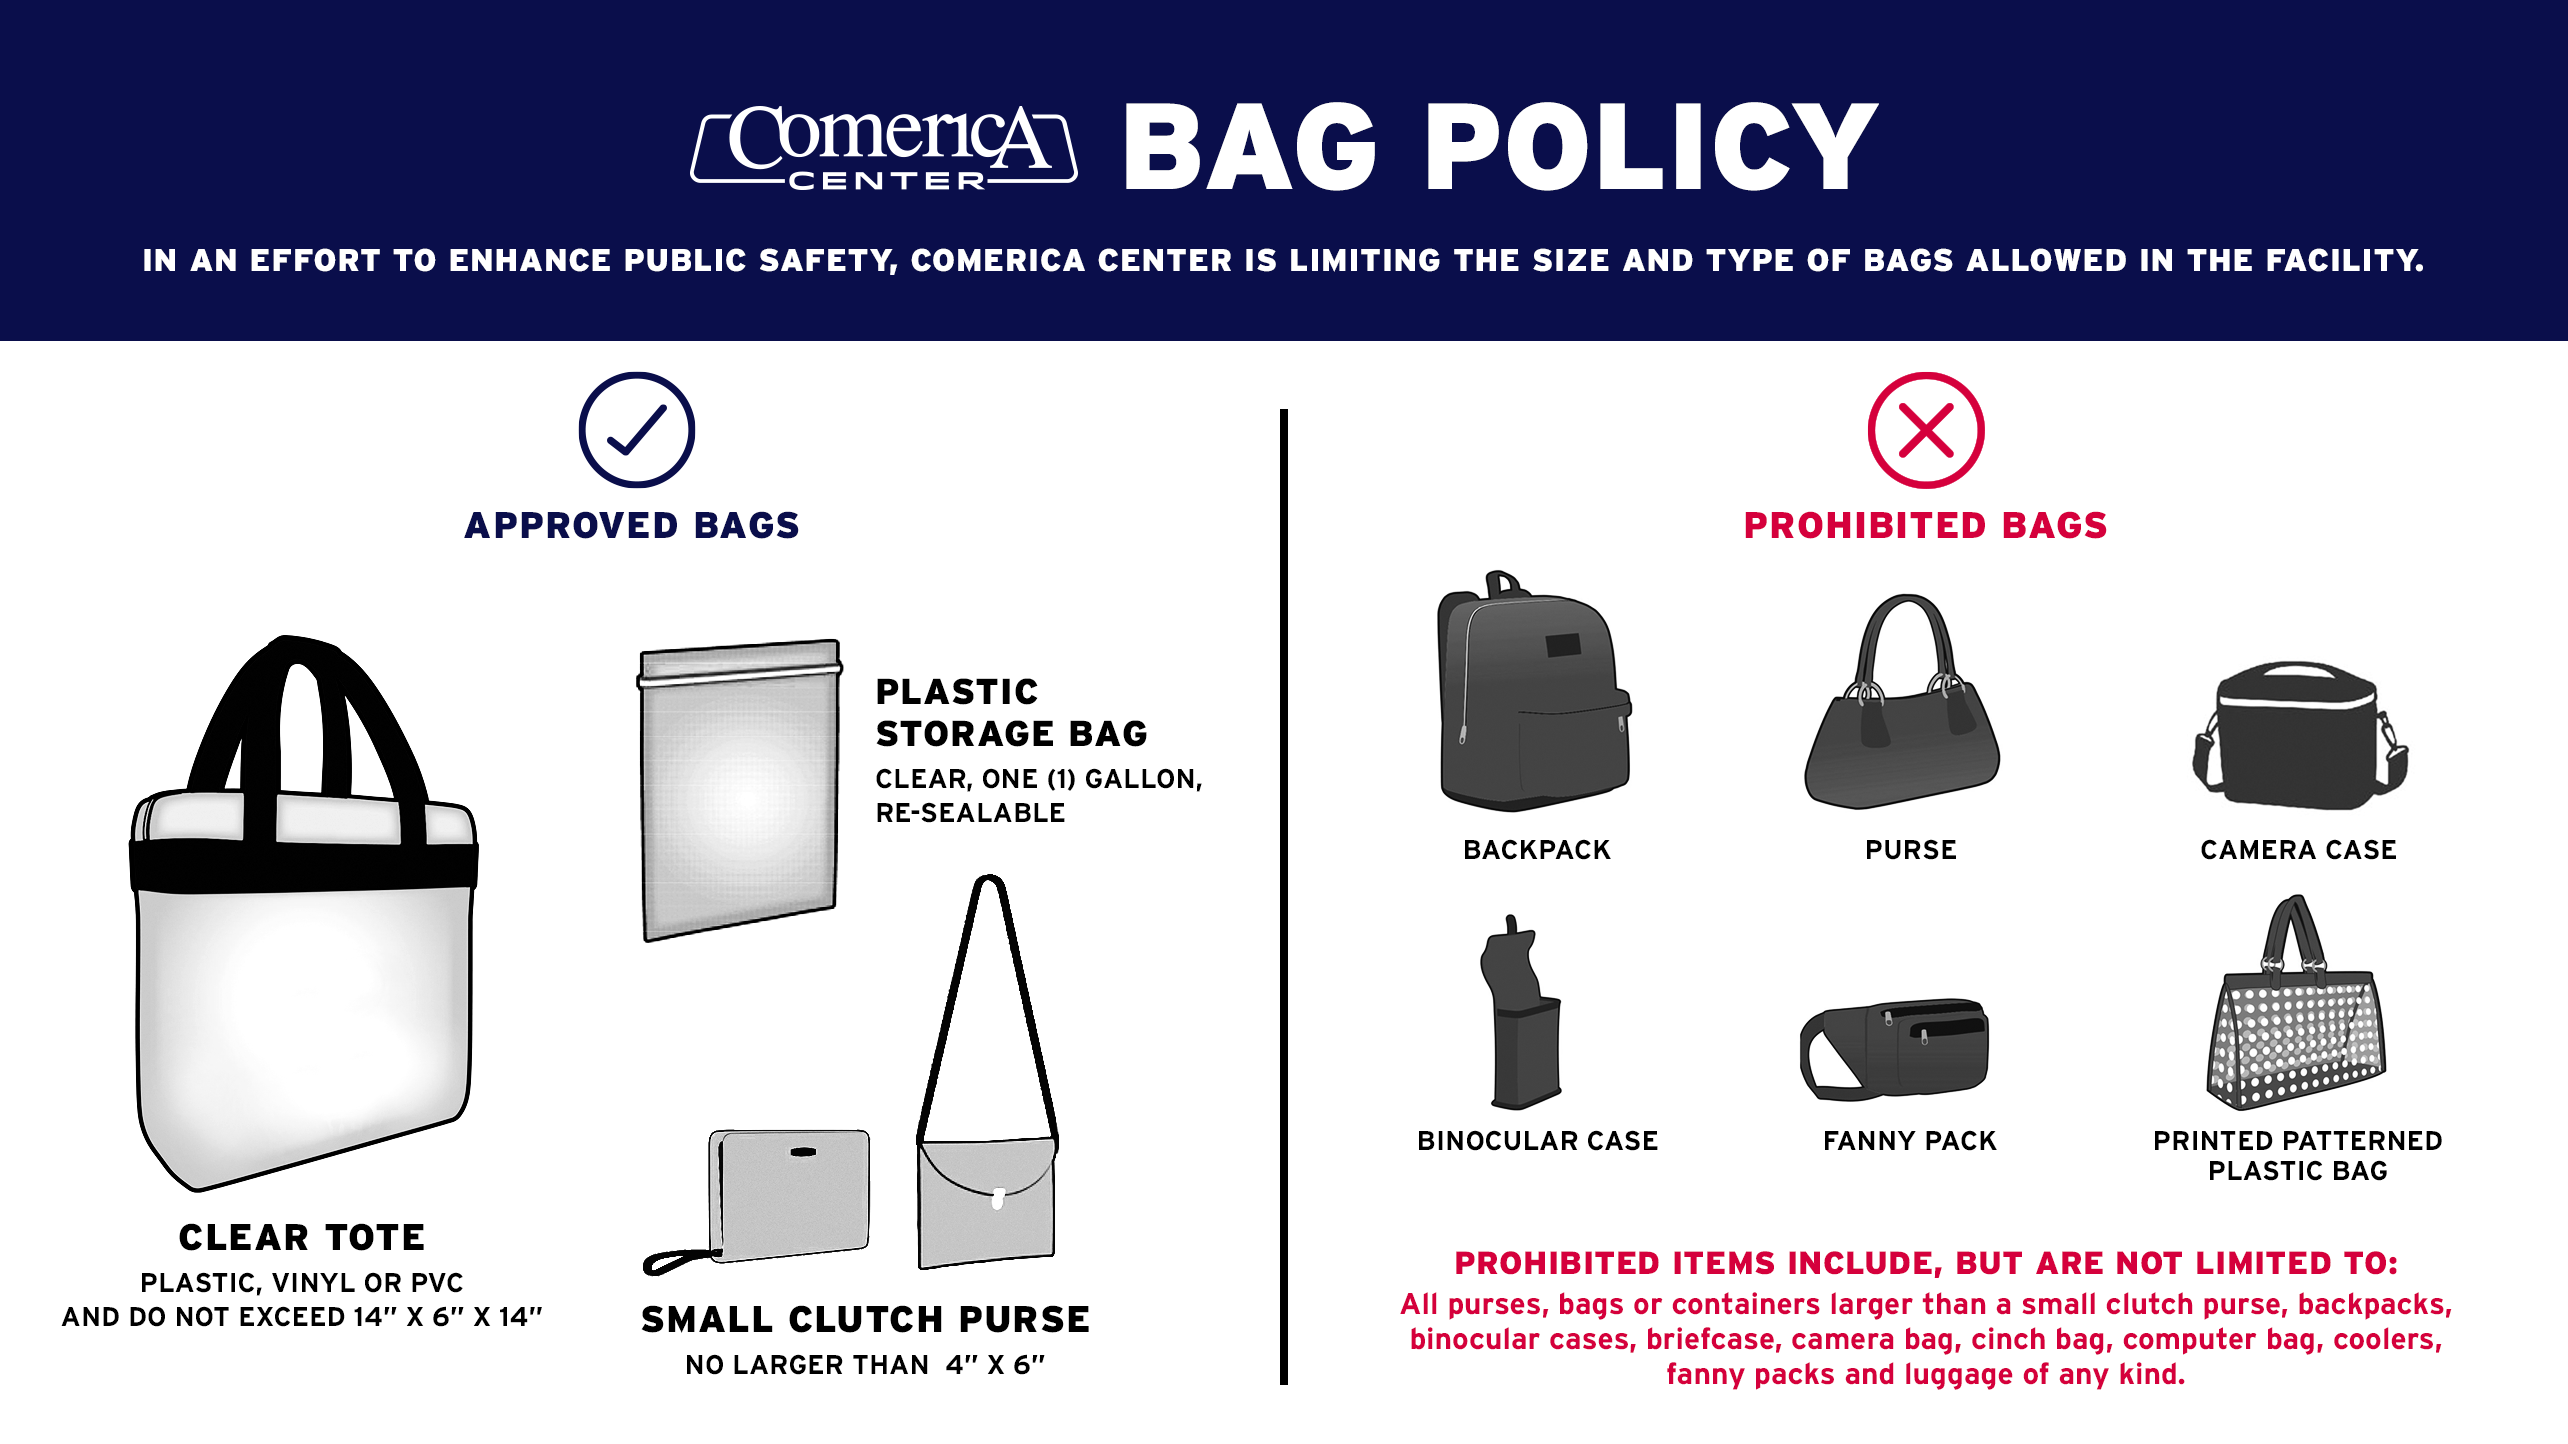 ComericaCenter_BagPolicy_2568x1444.png